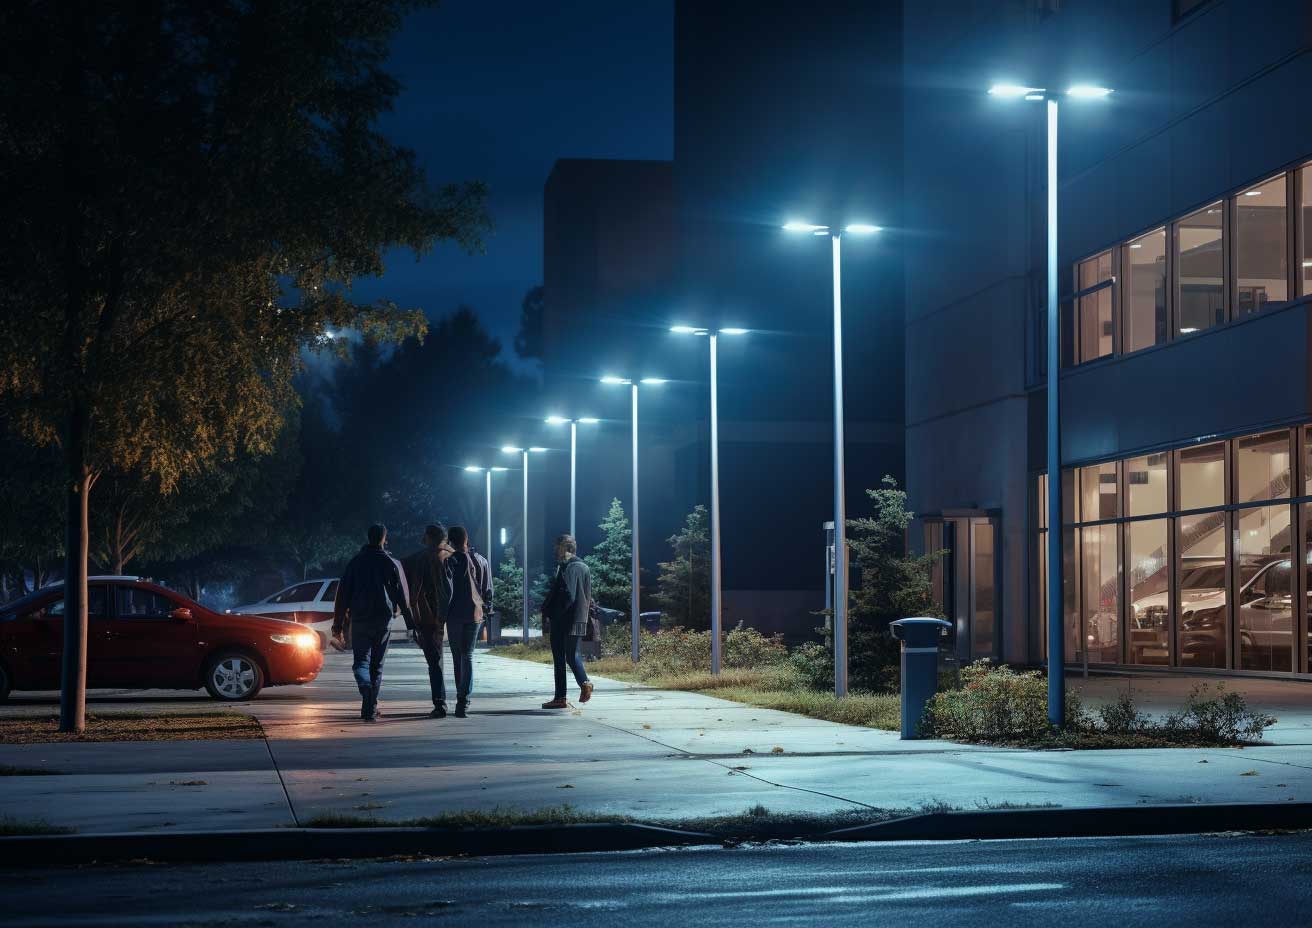 A group of people walking down a street at night.